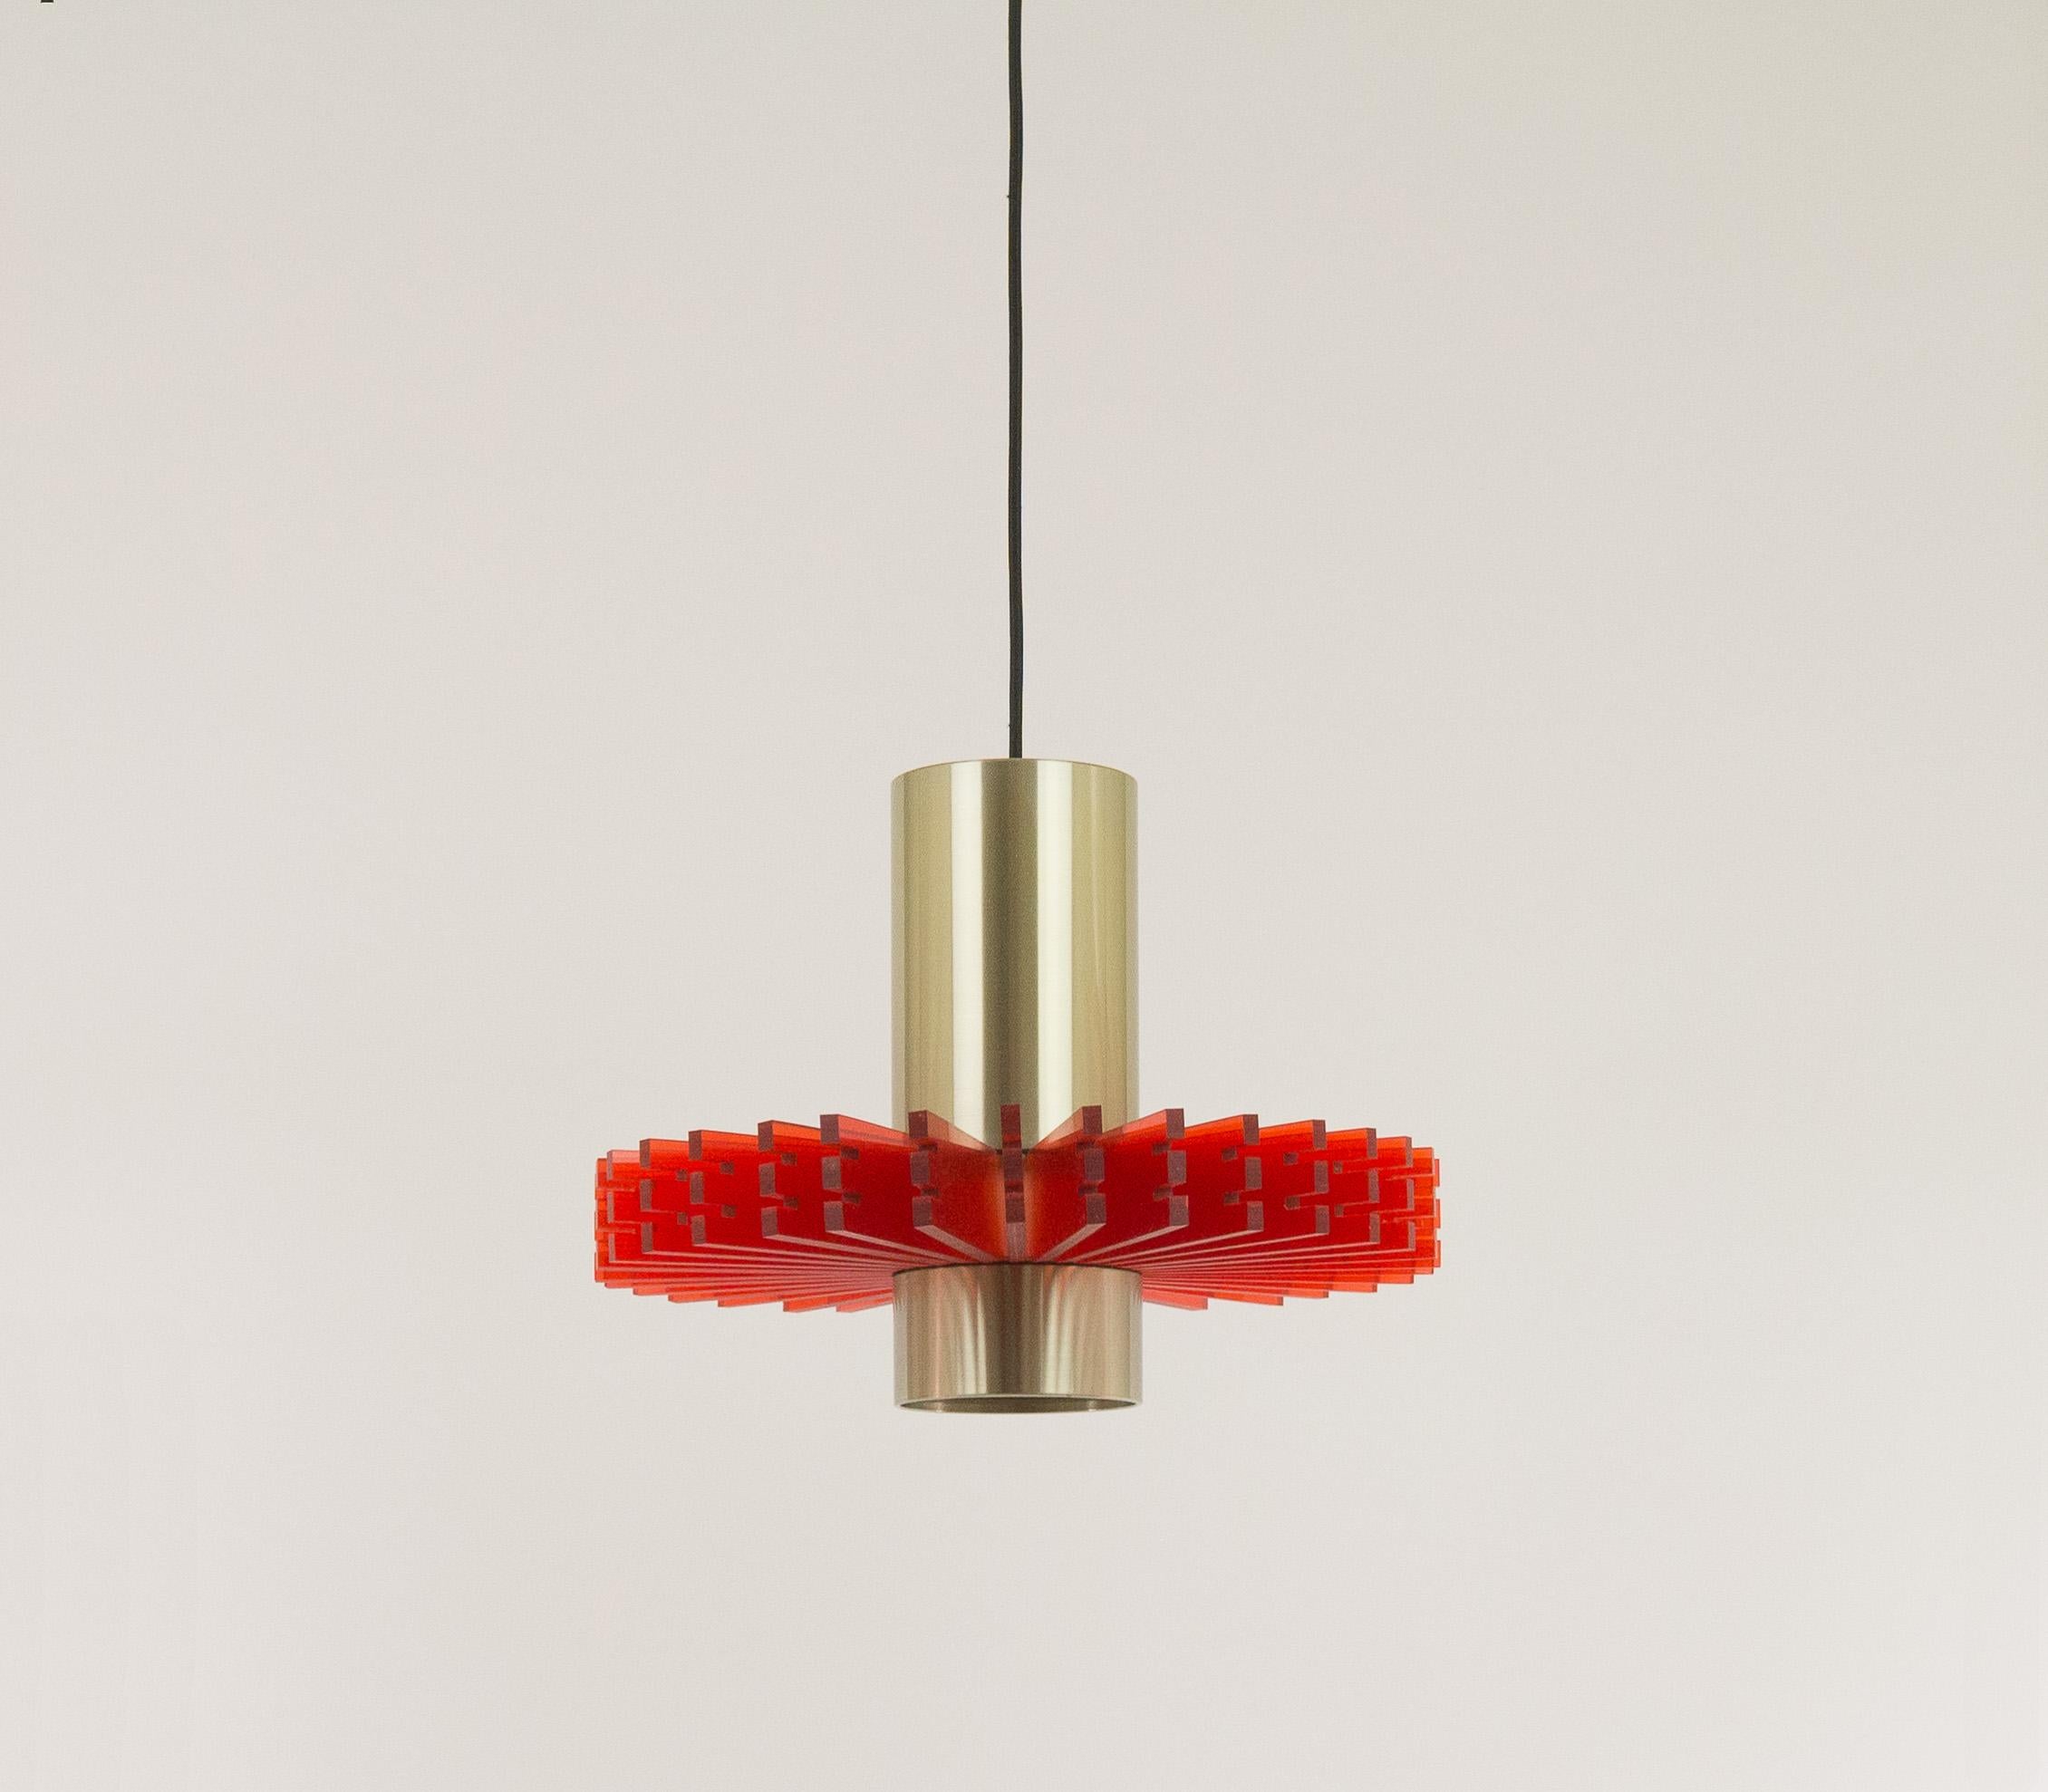 Aluminium and acrylic pendant, nicknamed 'Priest collar', designed by Claus Bolby for Danish lighting manufacturer Cebo in -most probably- the 1960s.

The pendant consists of two round aluminium elements which are joined by 32 yellow pieces of